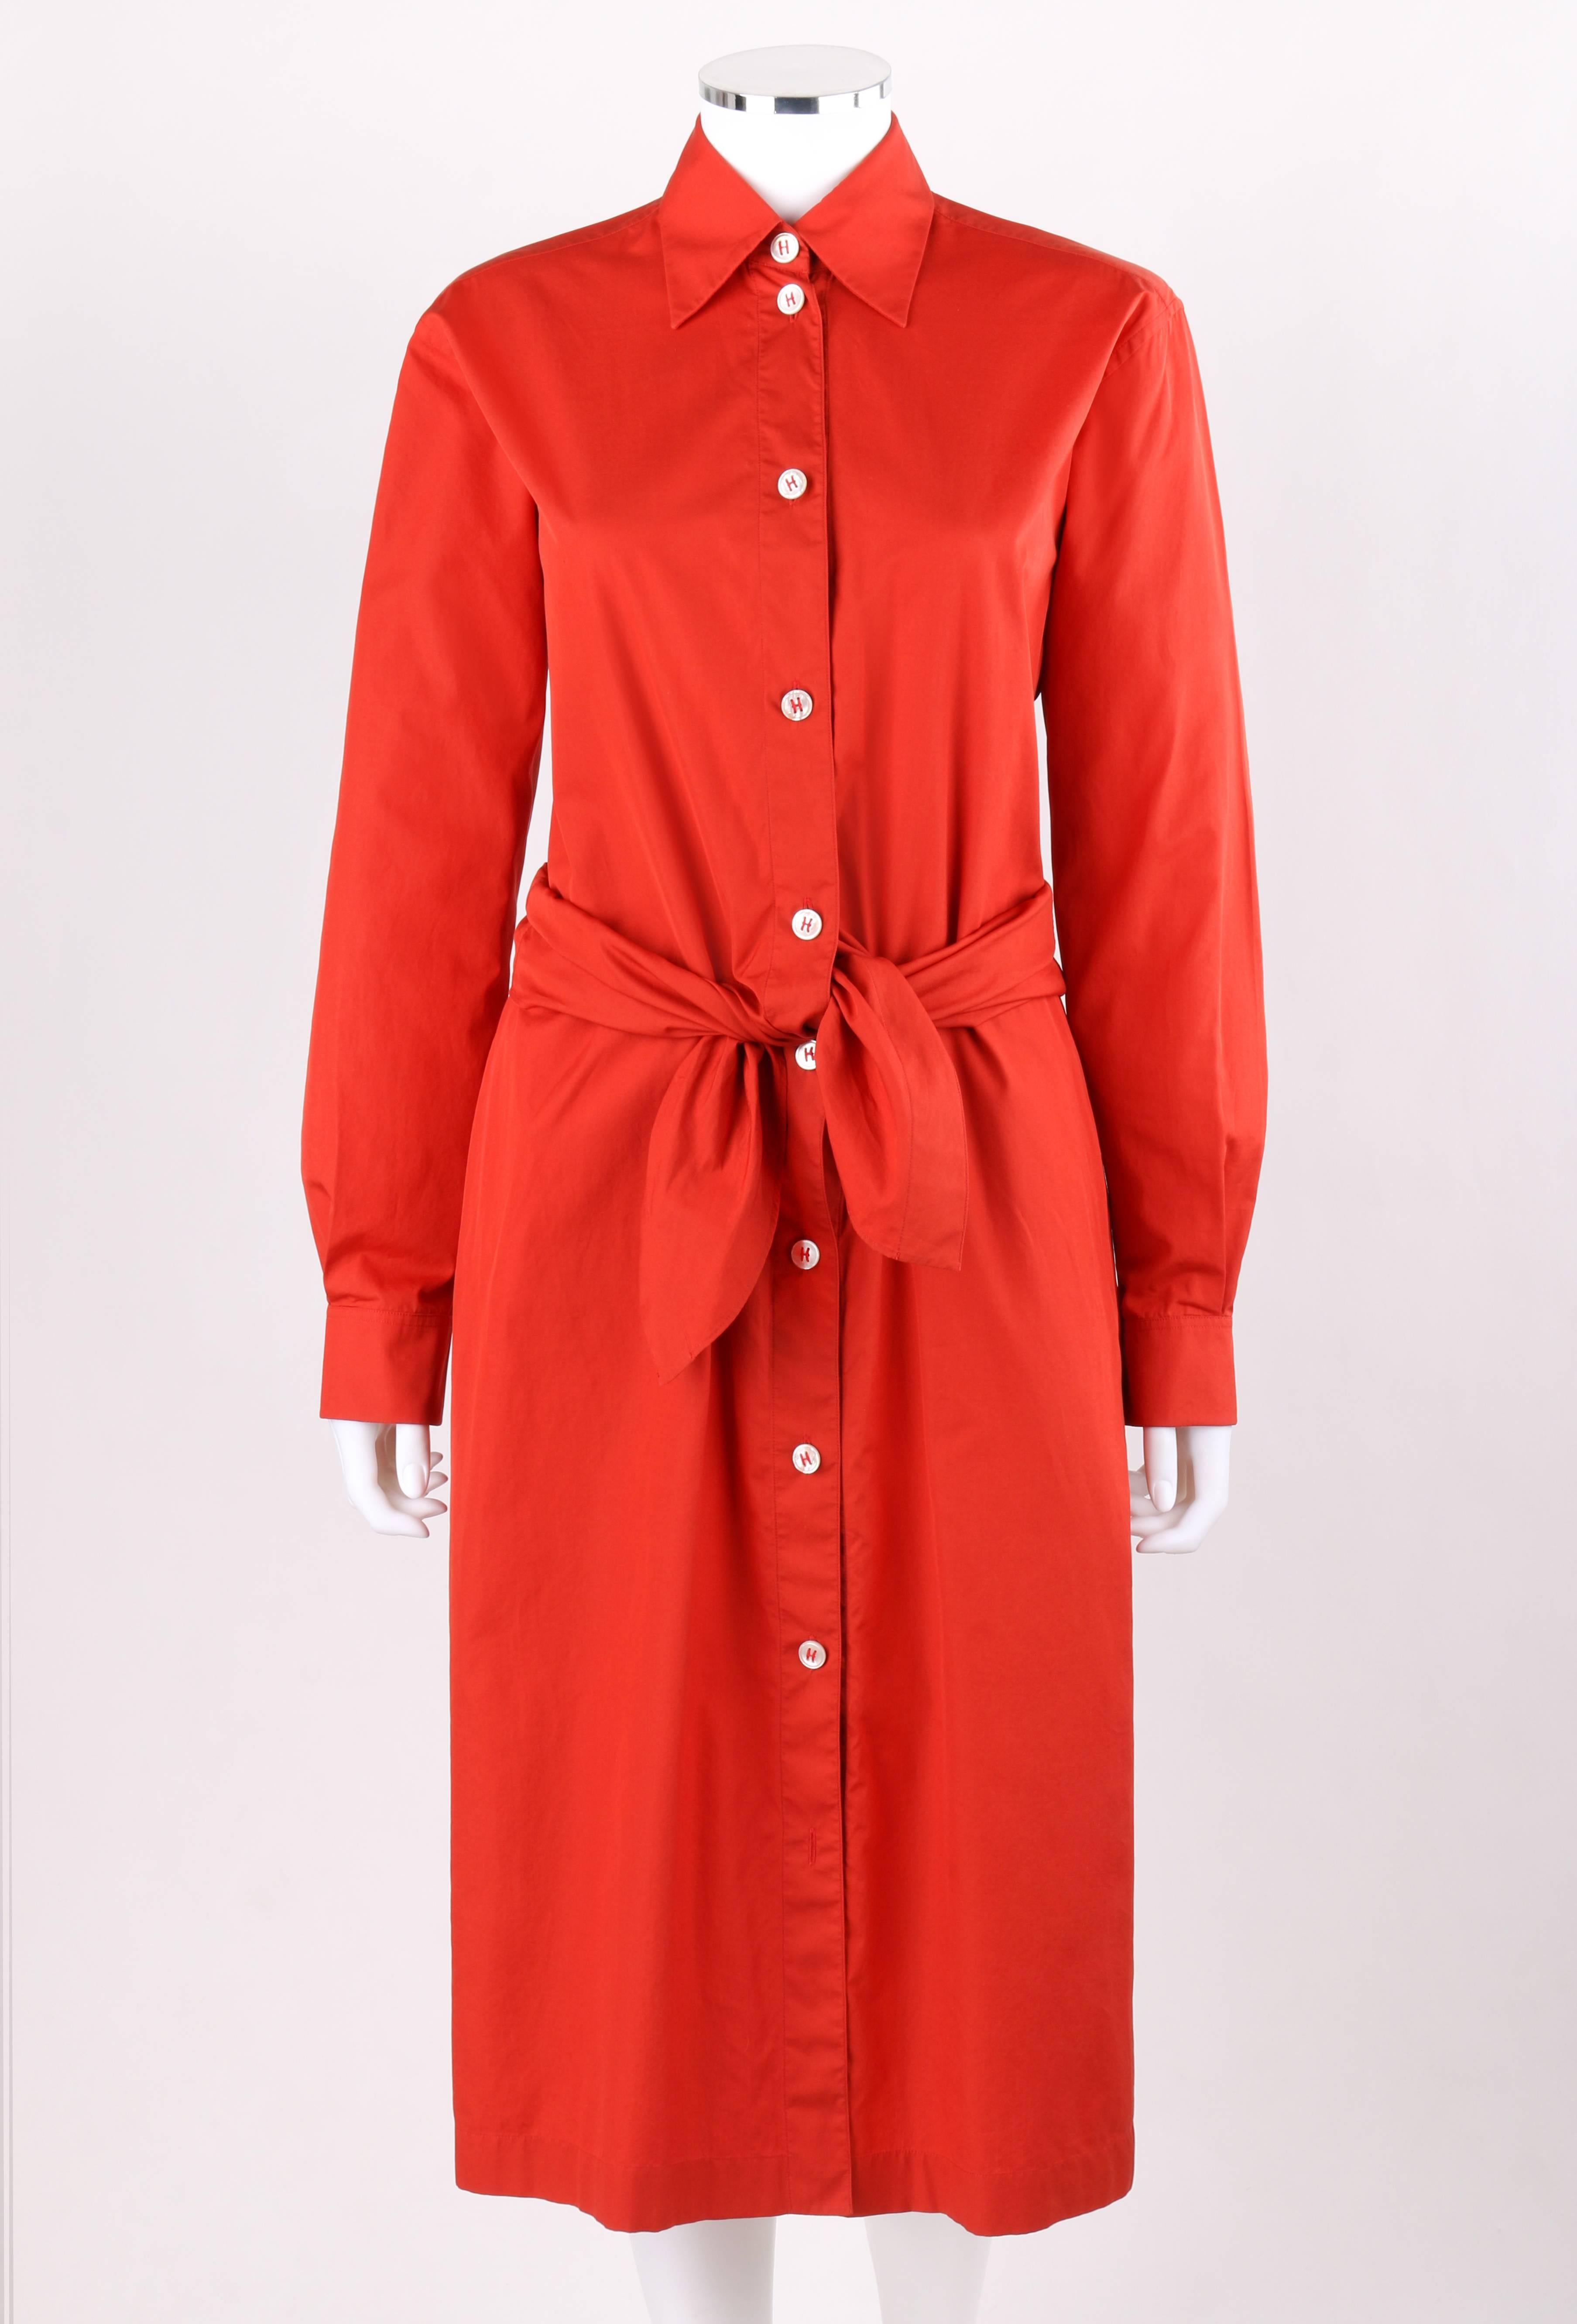 Hermes Spring / Summer 2004 coquelicot cotton long sleeve tie front cotton shirt waist dress. Designed by Martin Margiela. Shirt collar. Long sleeves with two knife pleats at cuff. Single button closure at sleeve cuff and placket. Nine center front